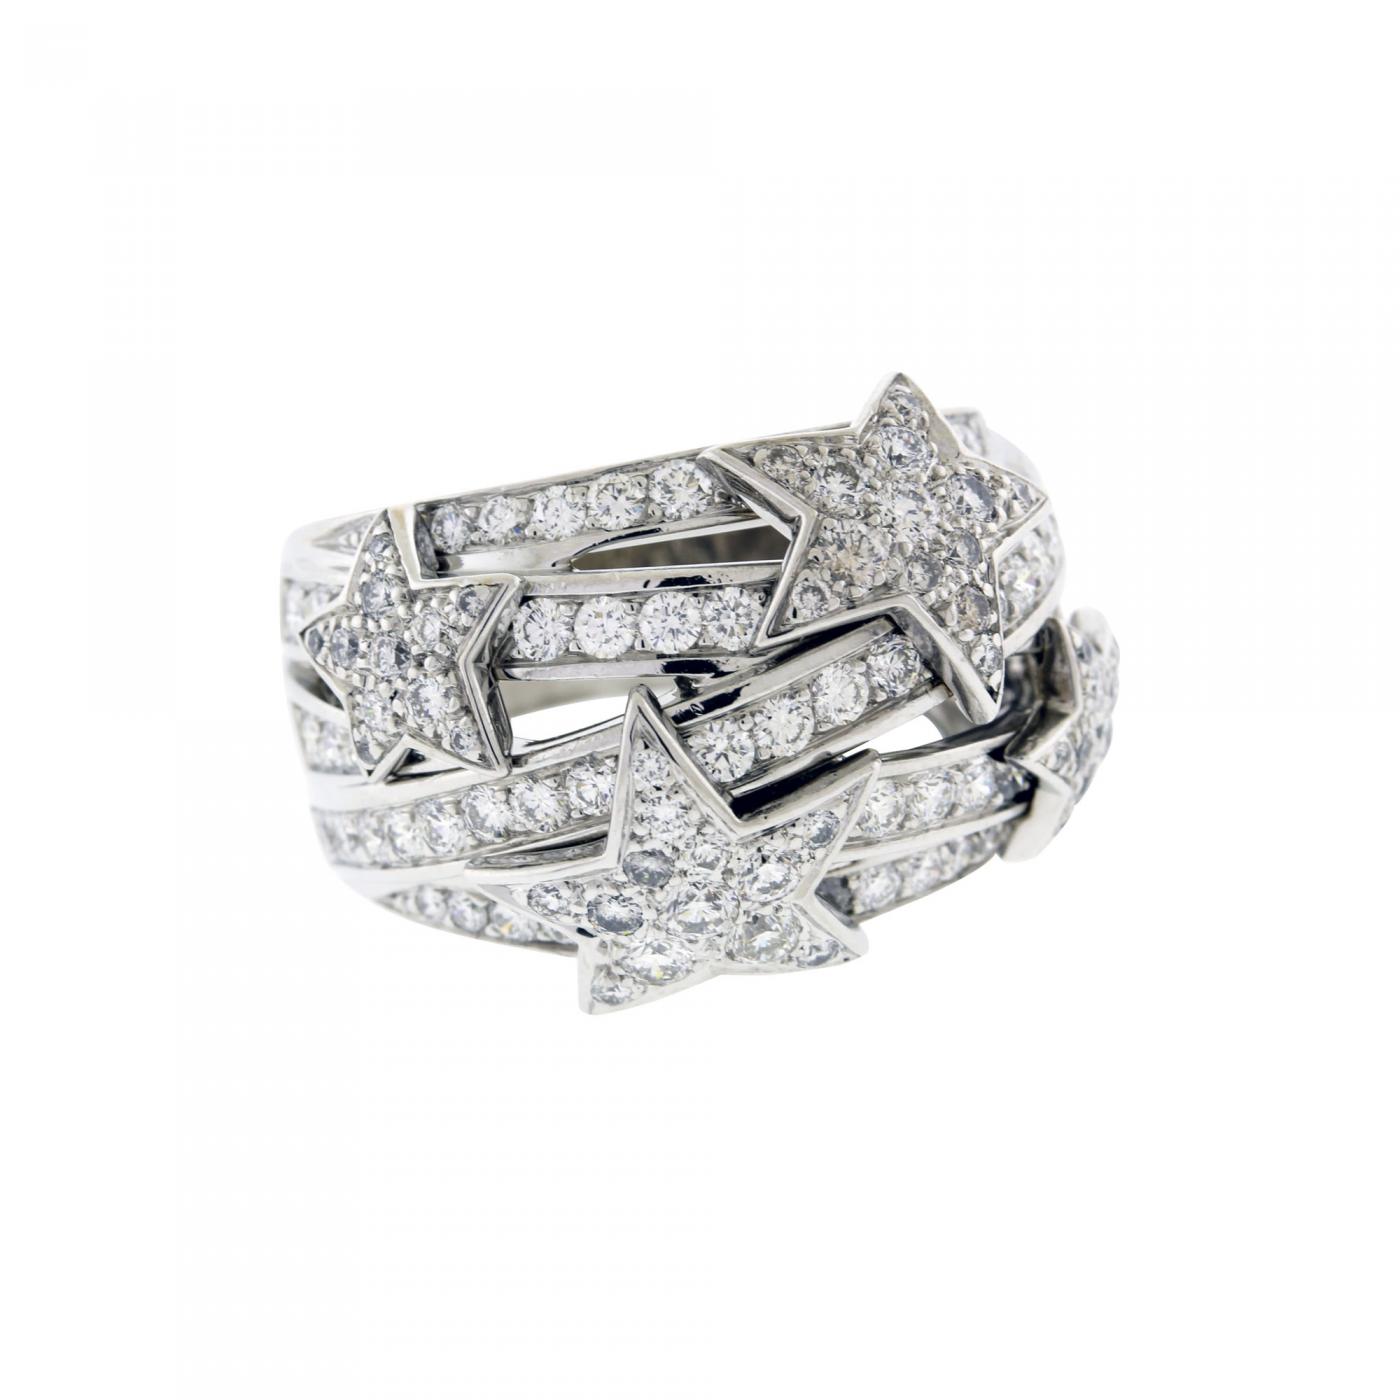 Chaumet White Gold and Diamond Ring, Cocktail Ring, Size 5 1/2, Contemporary Jewelry